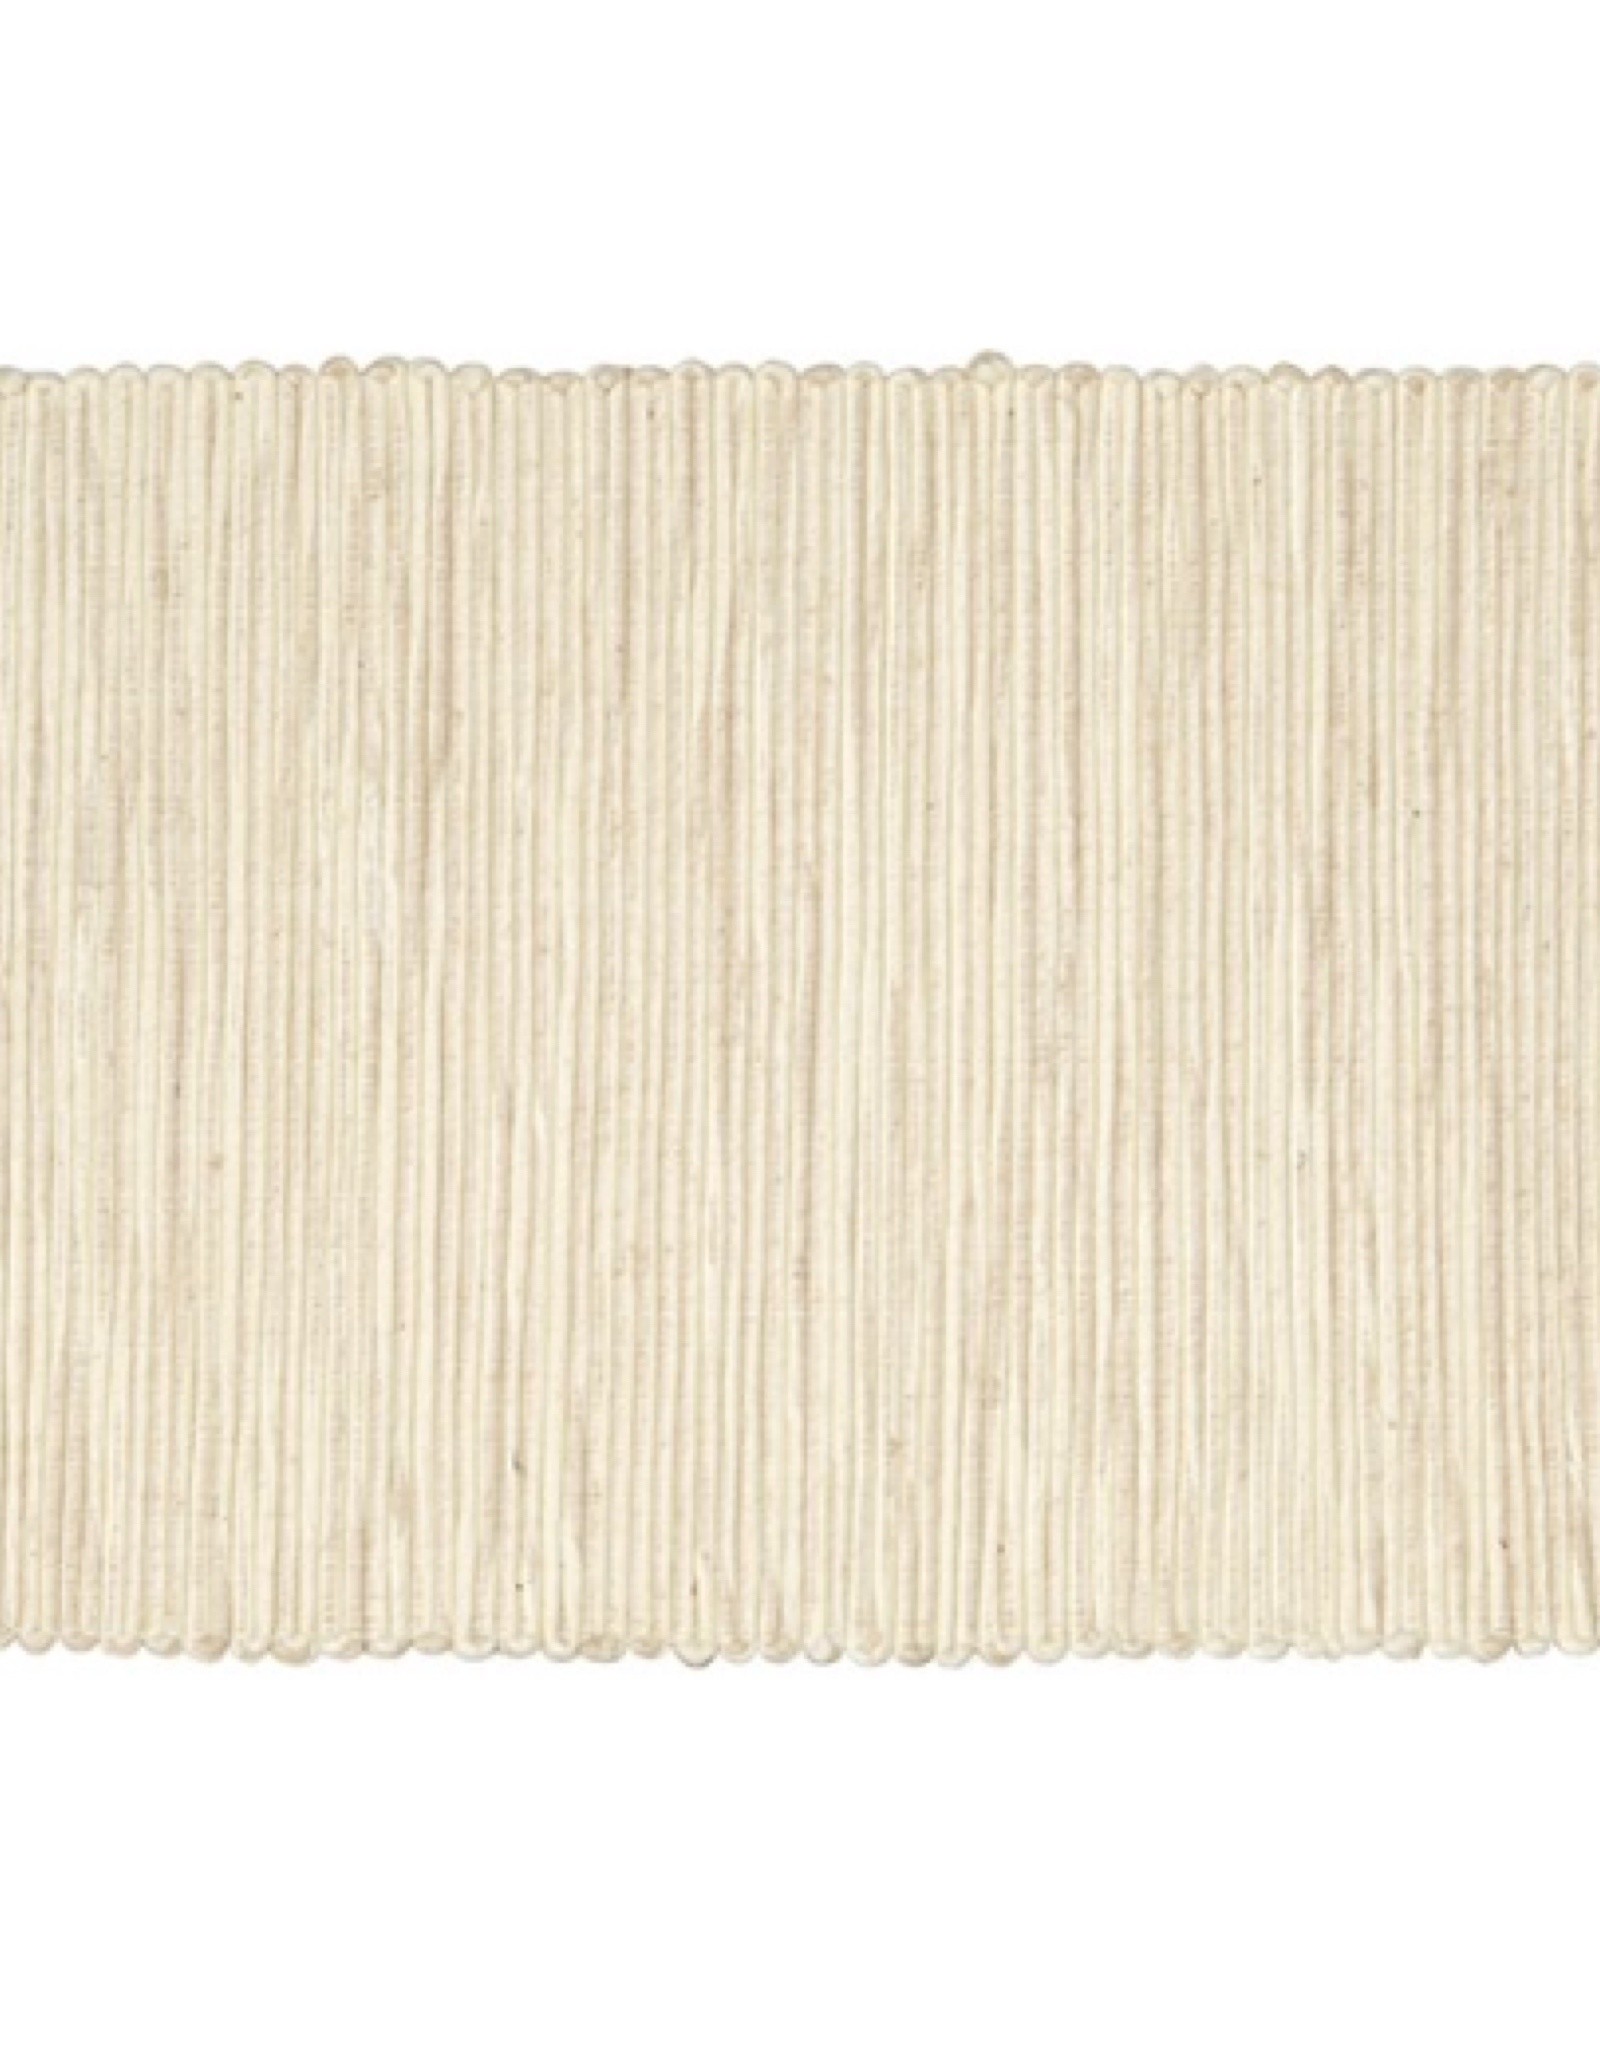 Placemat Harman Two Toned Ribbed Natural 0888602